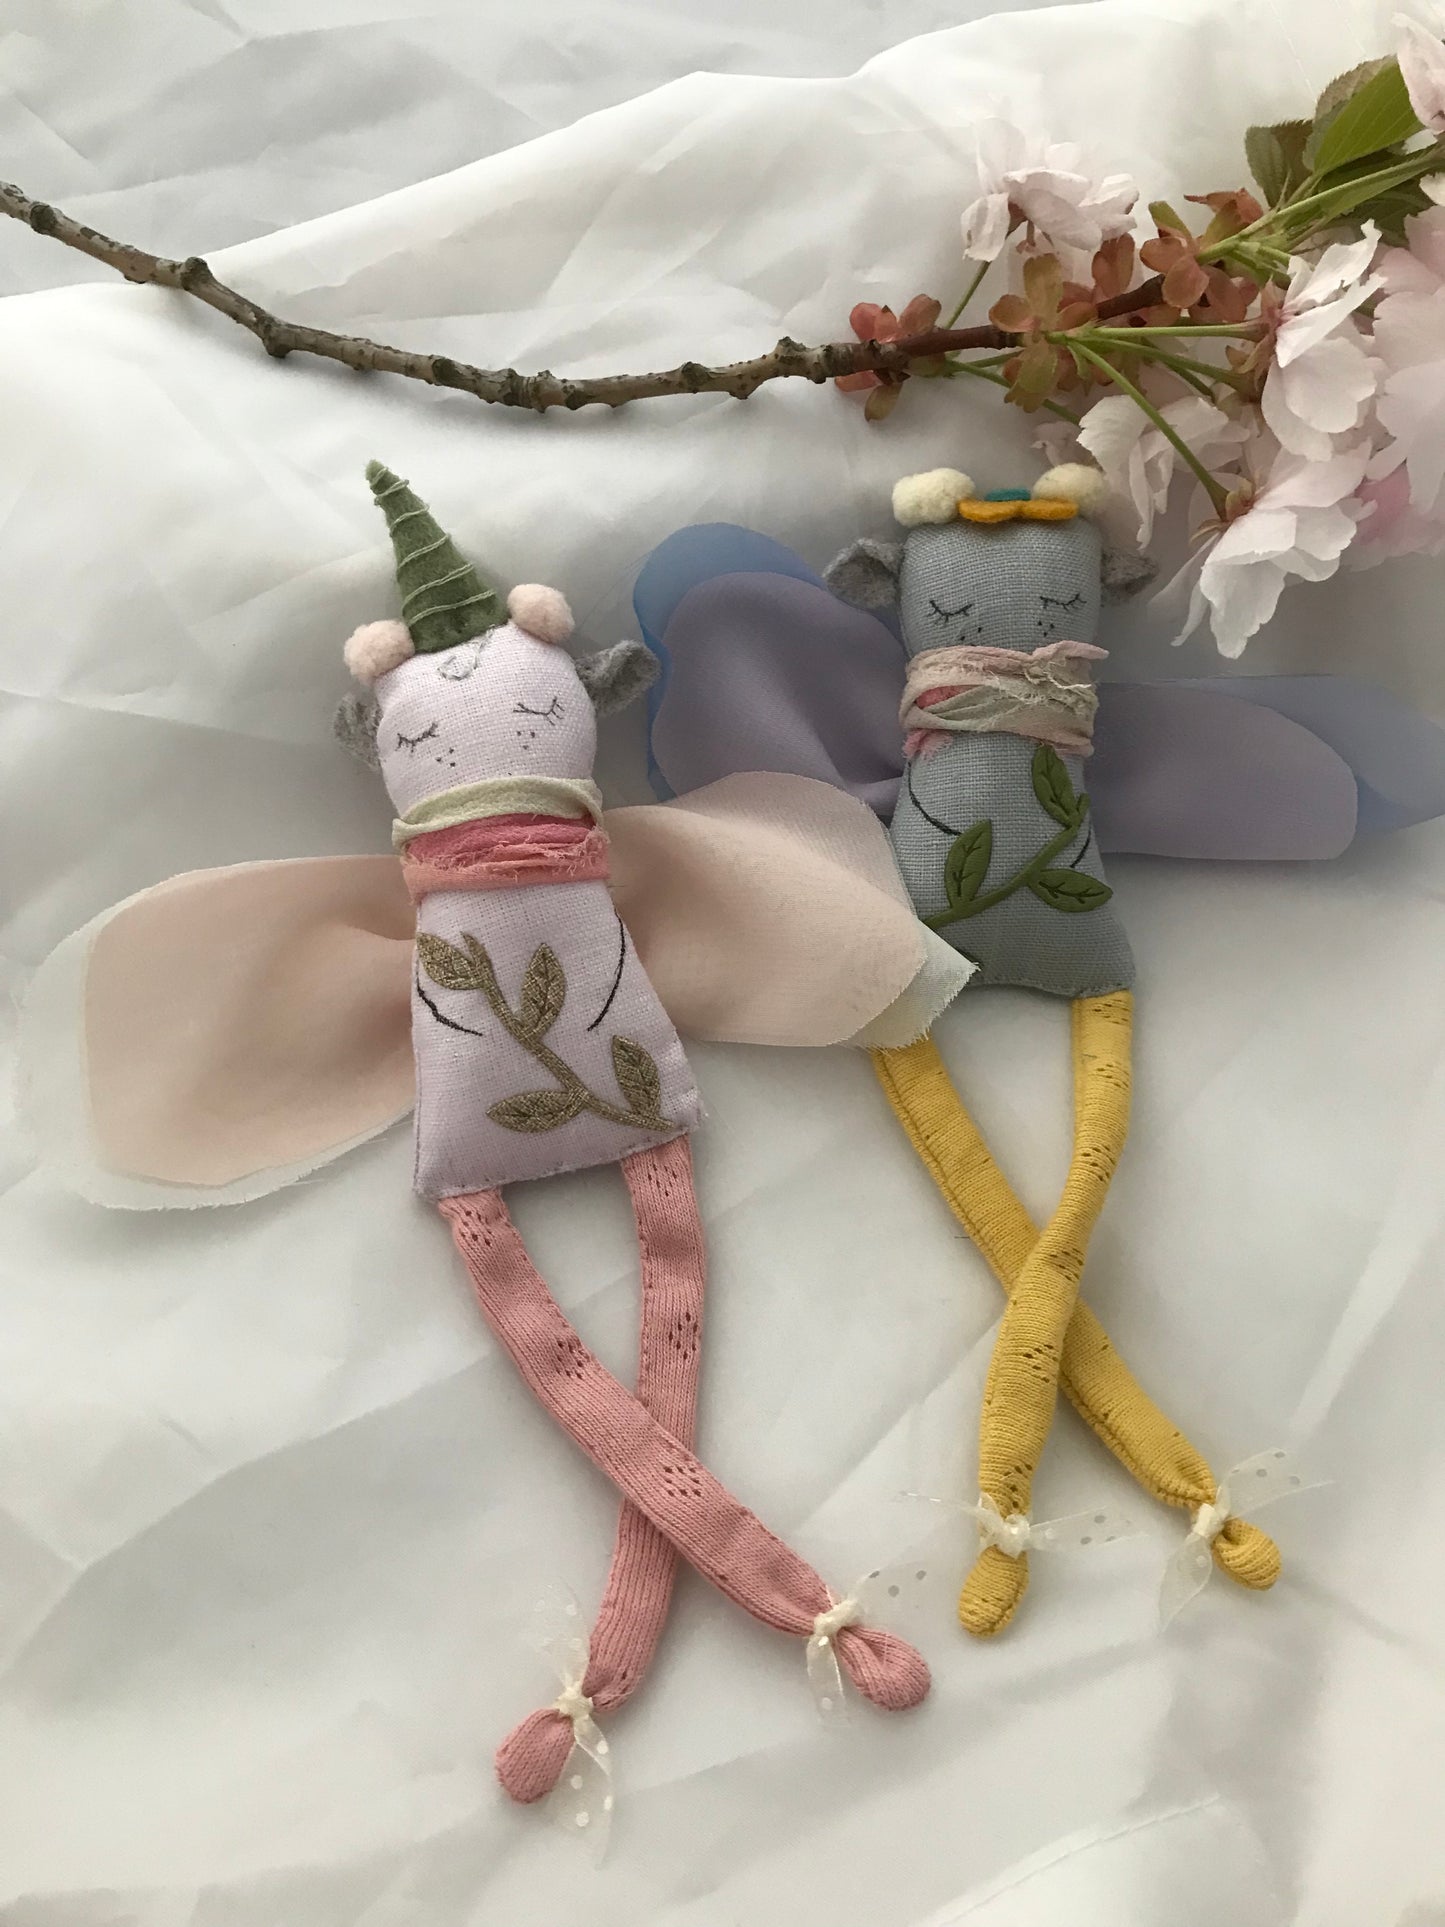 Joli Lutin (Pixie) cloth Doll, Children's Gifts, Soft Toys, Kids Bedroom Decor, accessories and Gifts